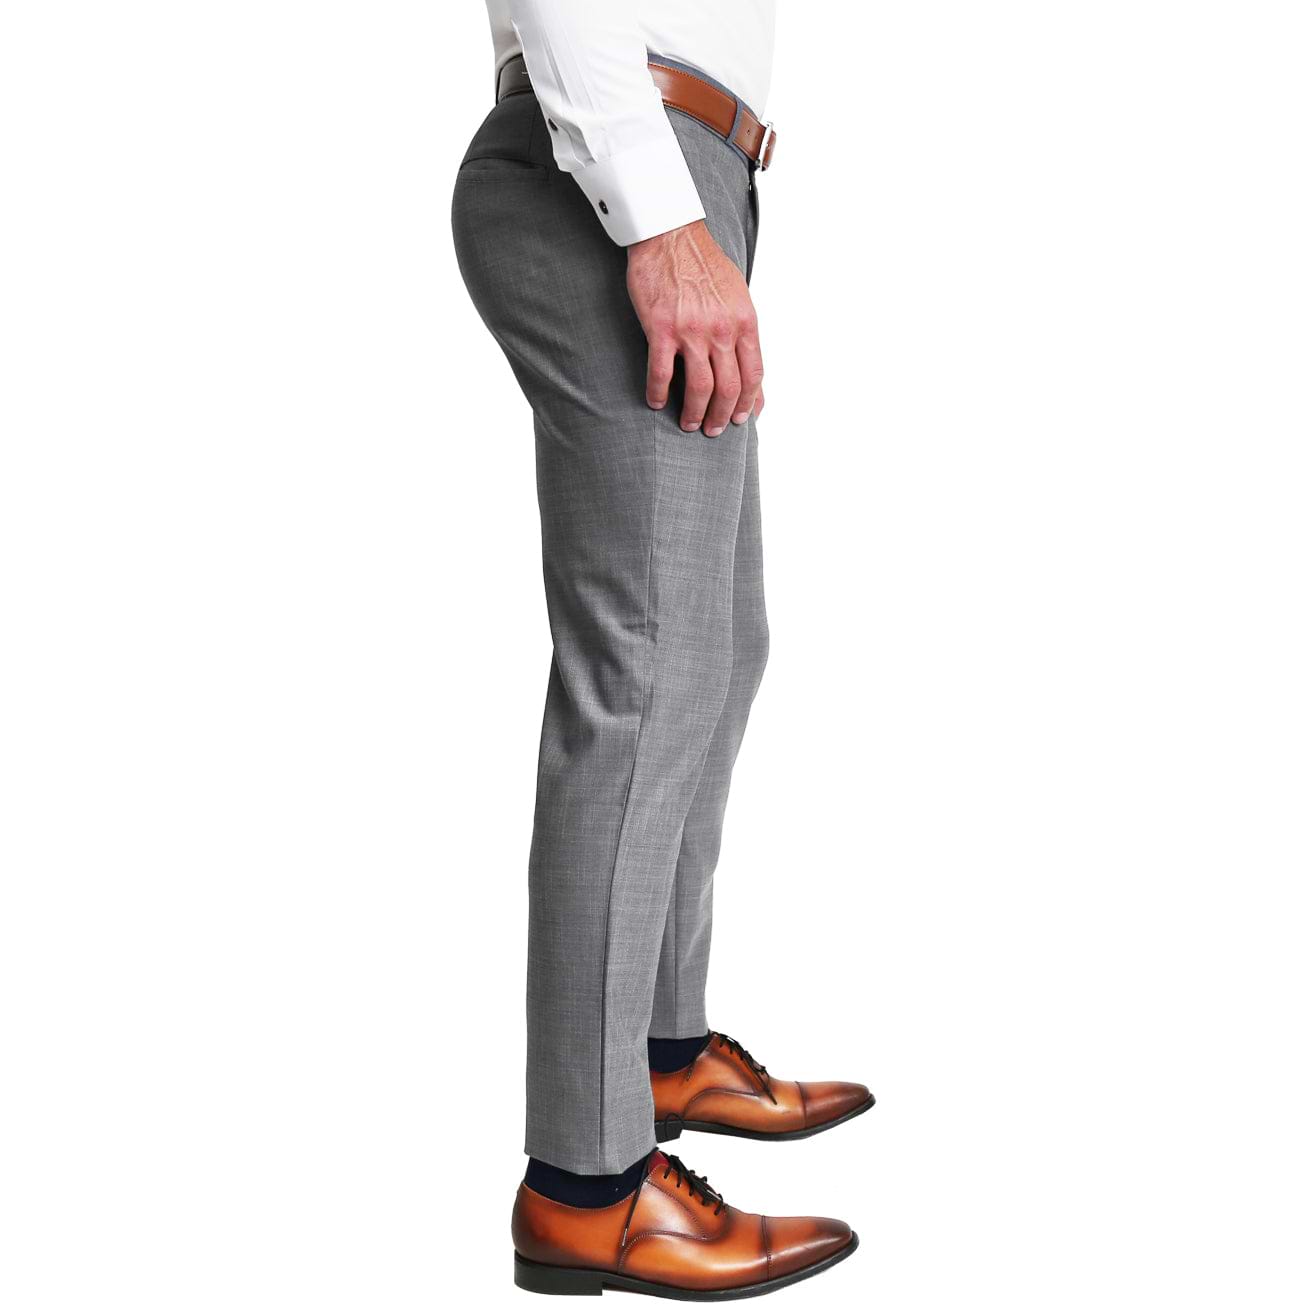 Slacks vs. Dress Pants: Is There A Difference? // UnderFit